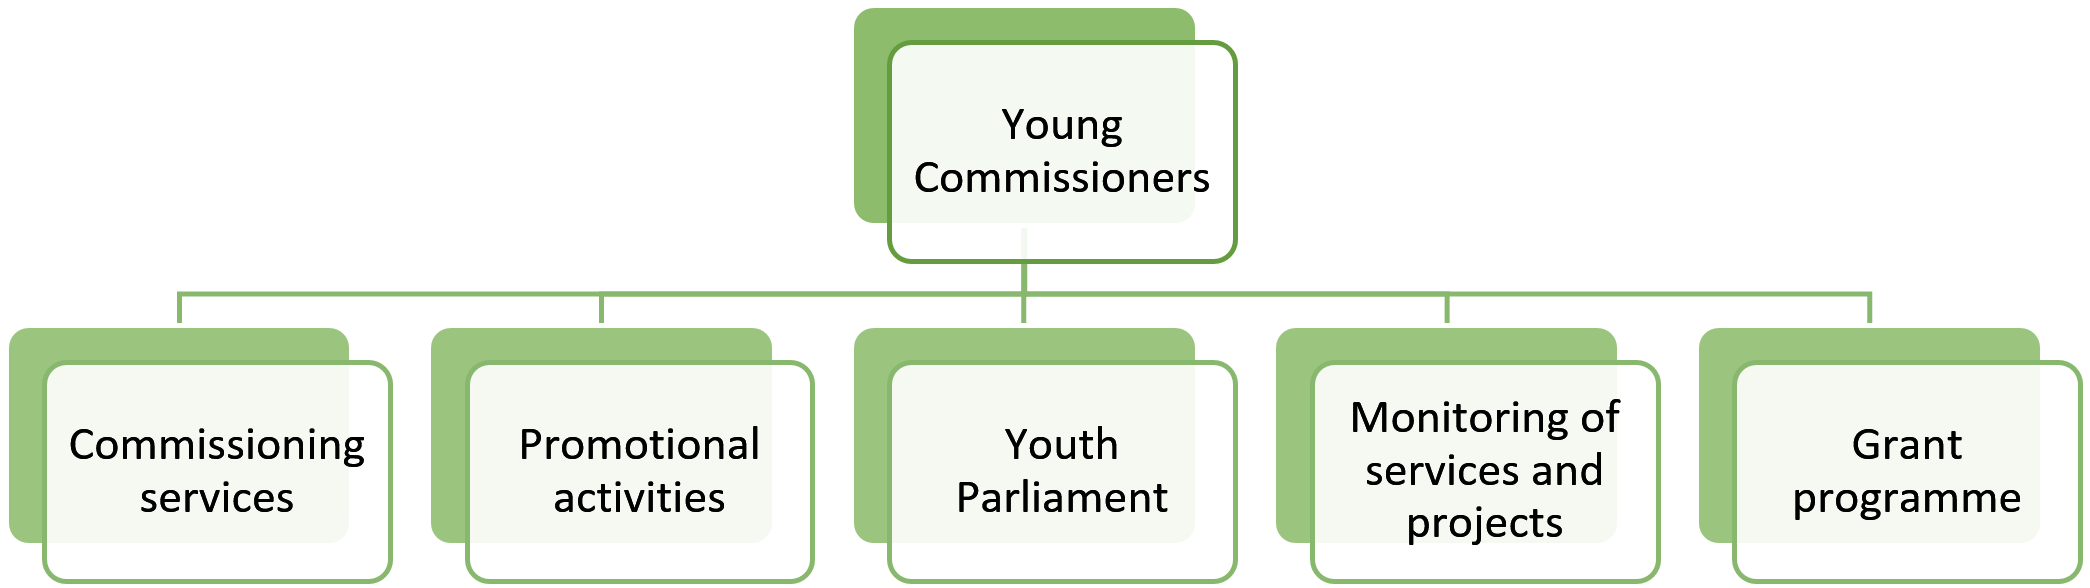 A picture explaining what the young commissioners are, the information is also available below